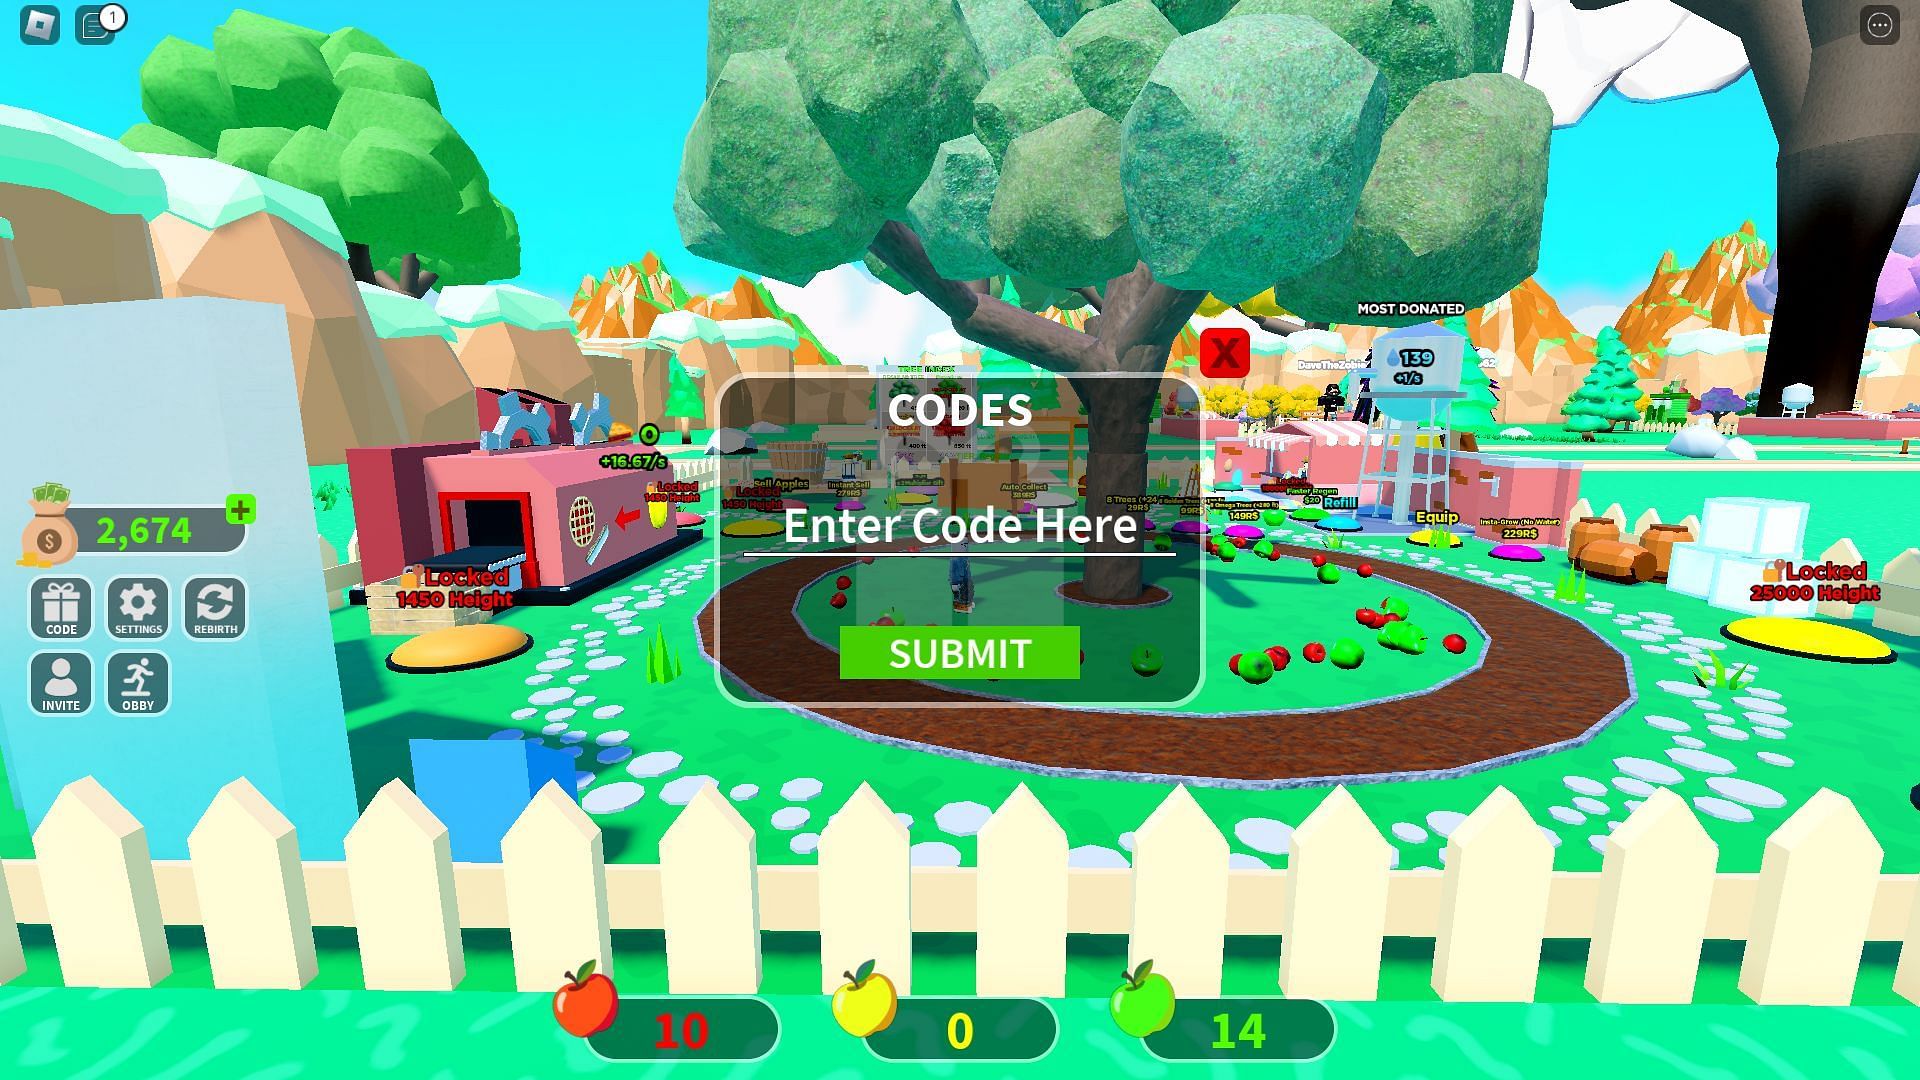 There are many active codes for Grow a Tree Tycoon (Image via Roblox)